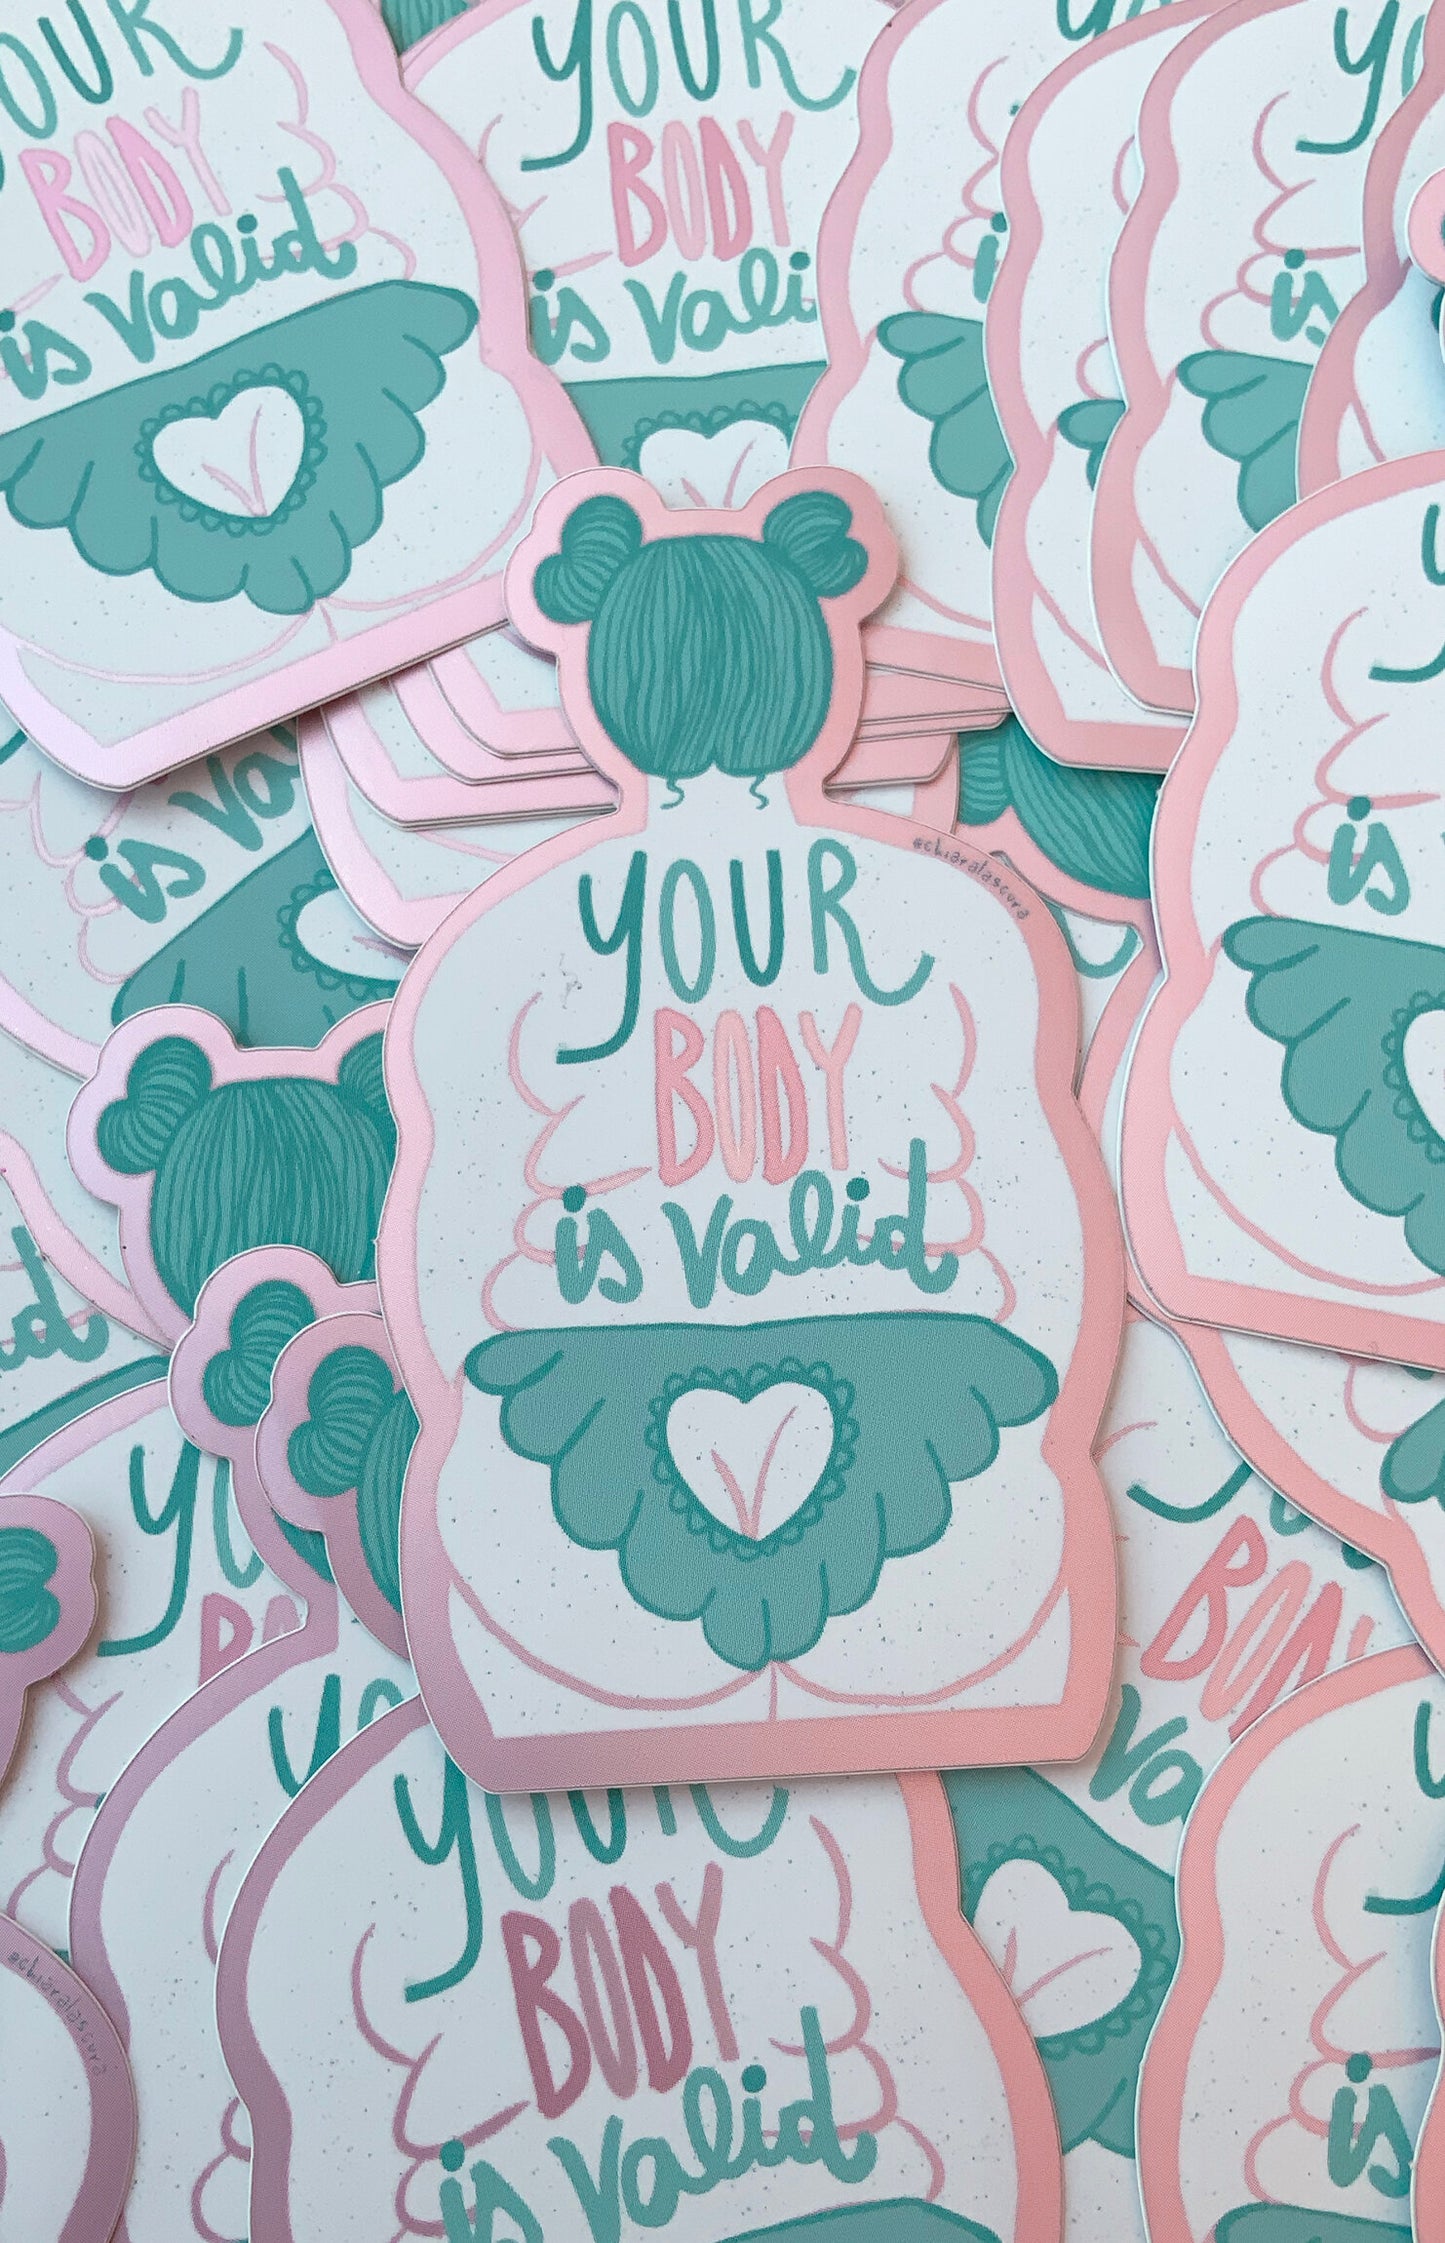 Your body is valid - sticker